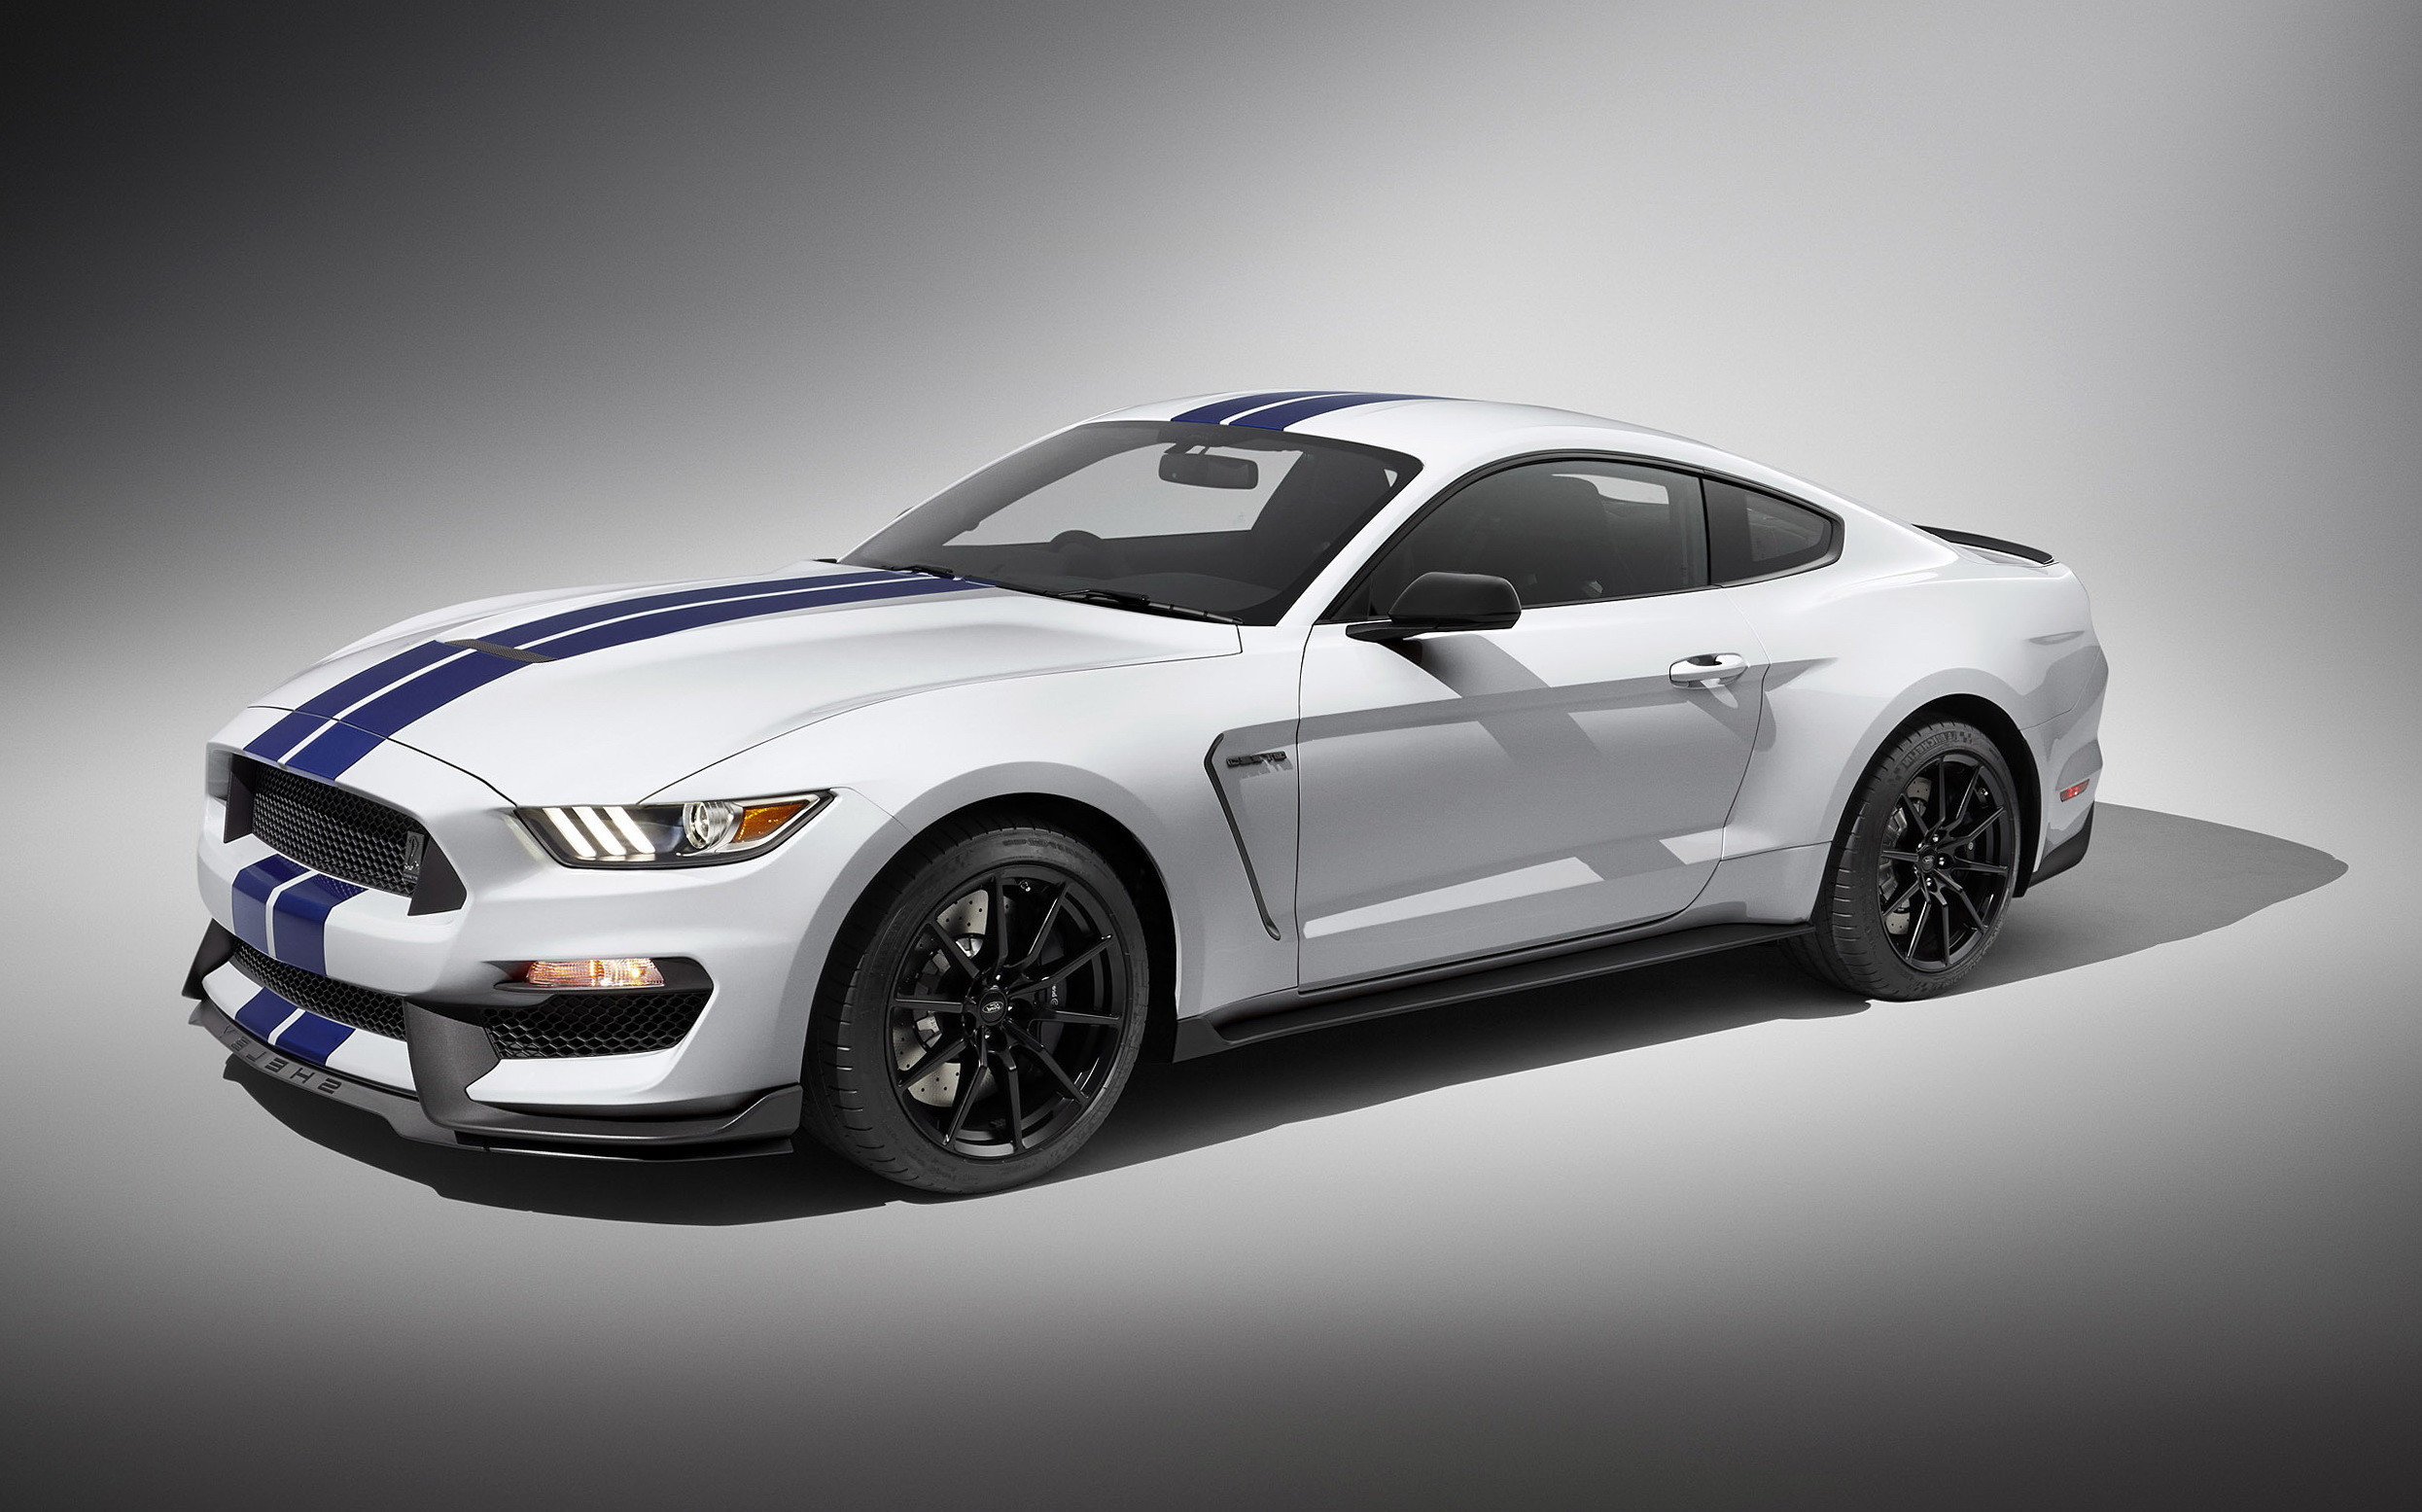 2491x1555 2016 Ford Mustang Shelby Gt350 Wallpaper | Automotive Designs